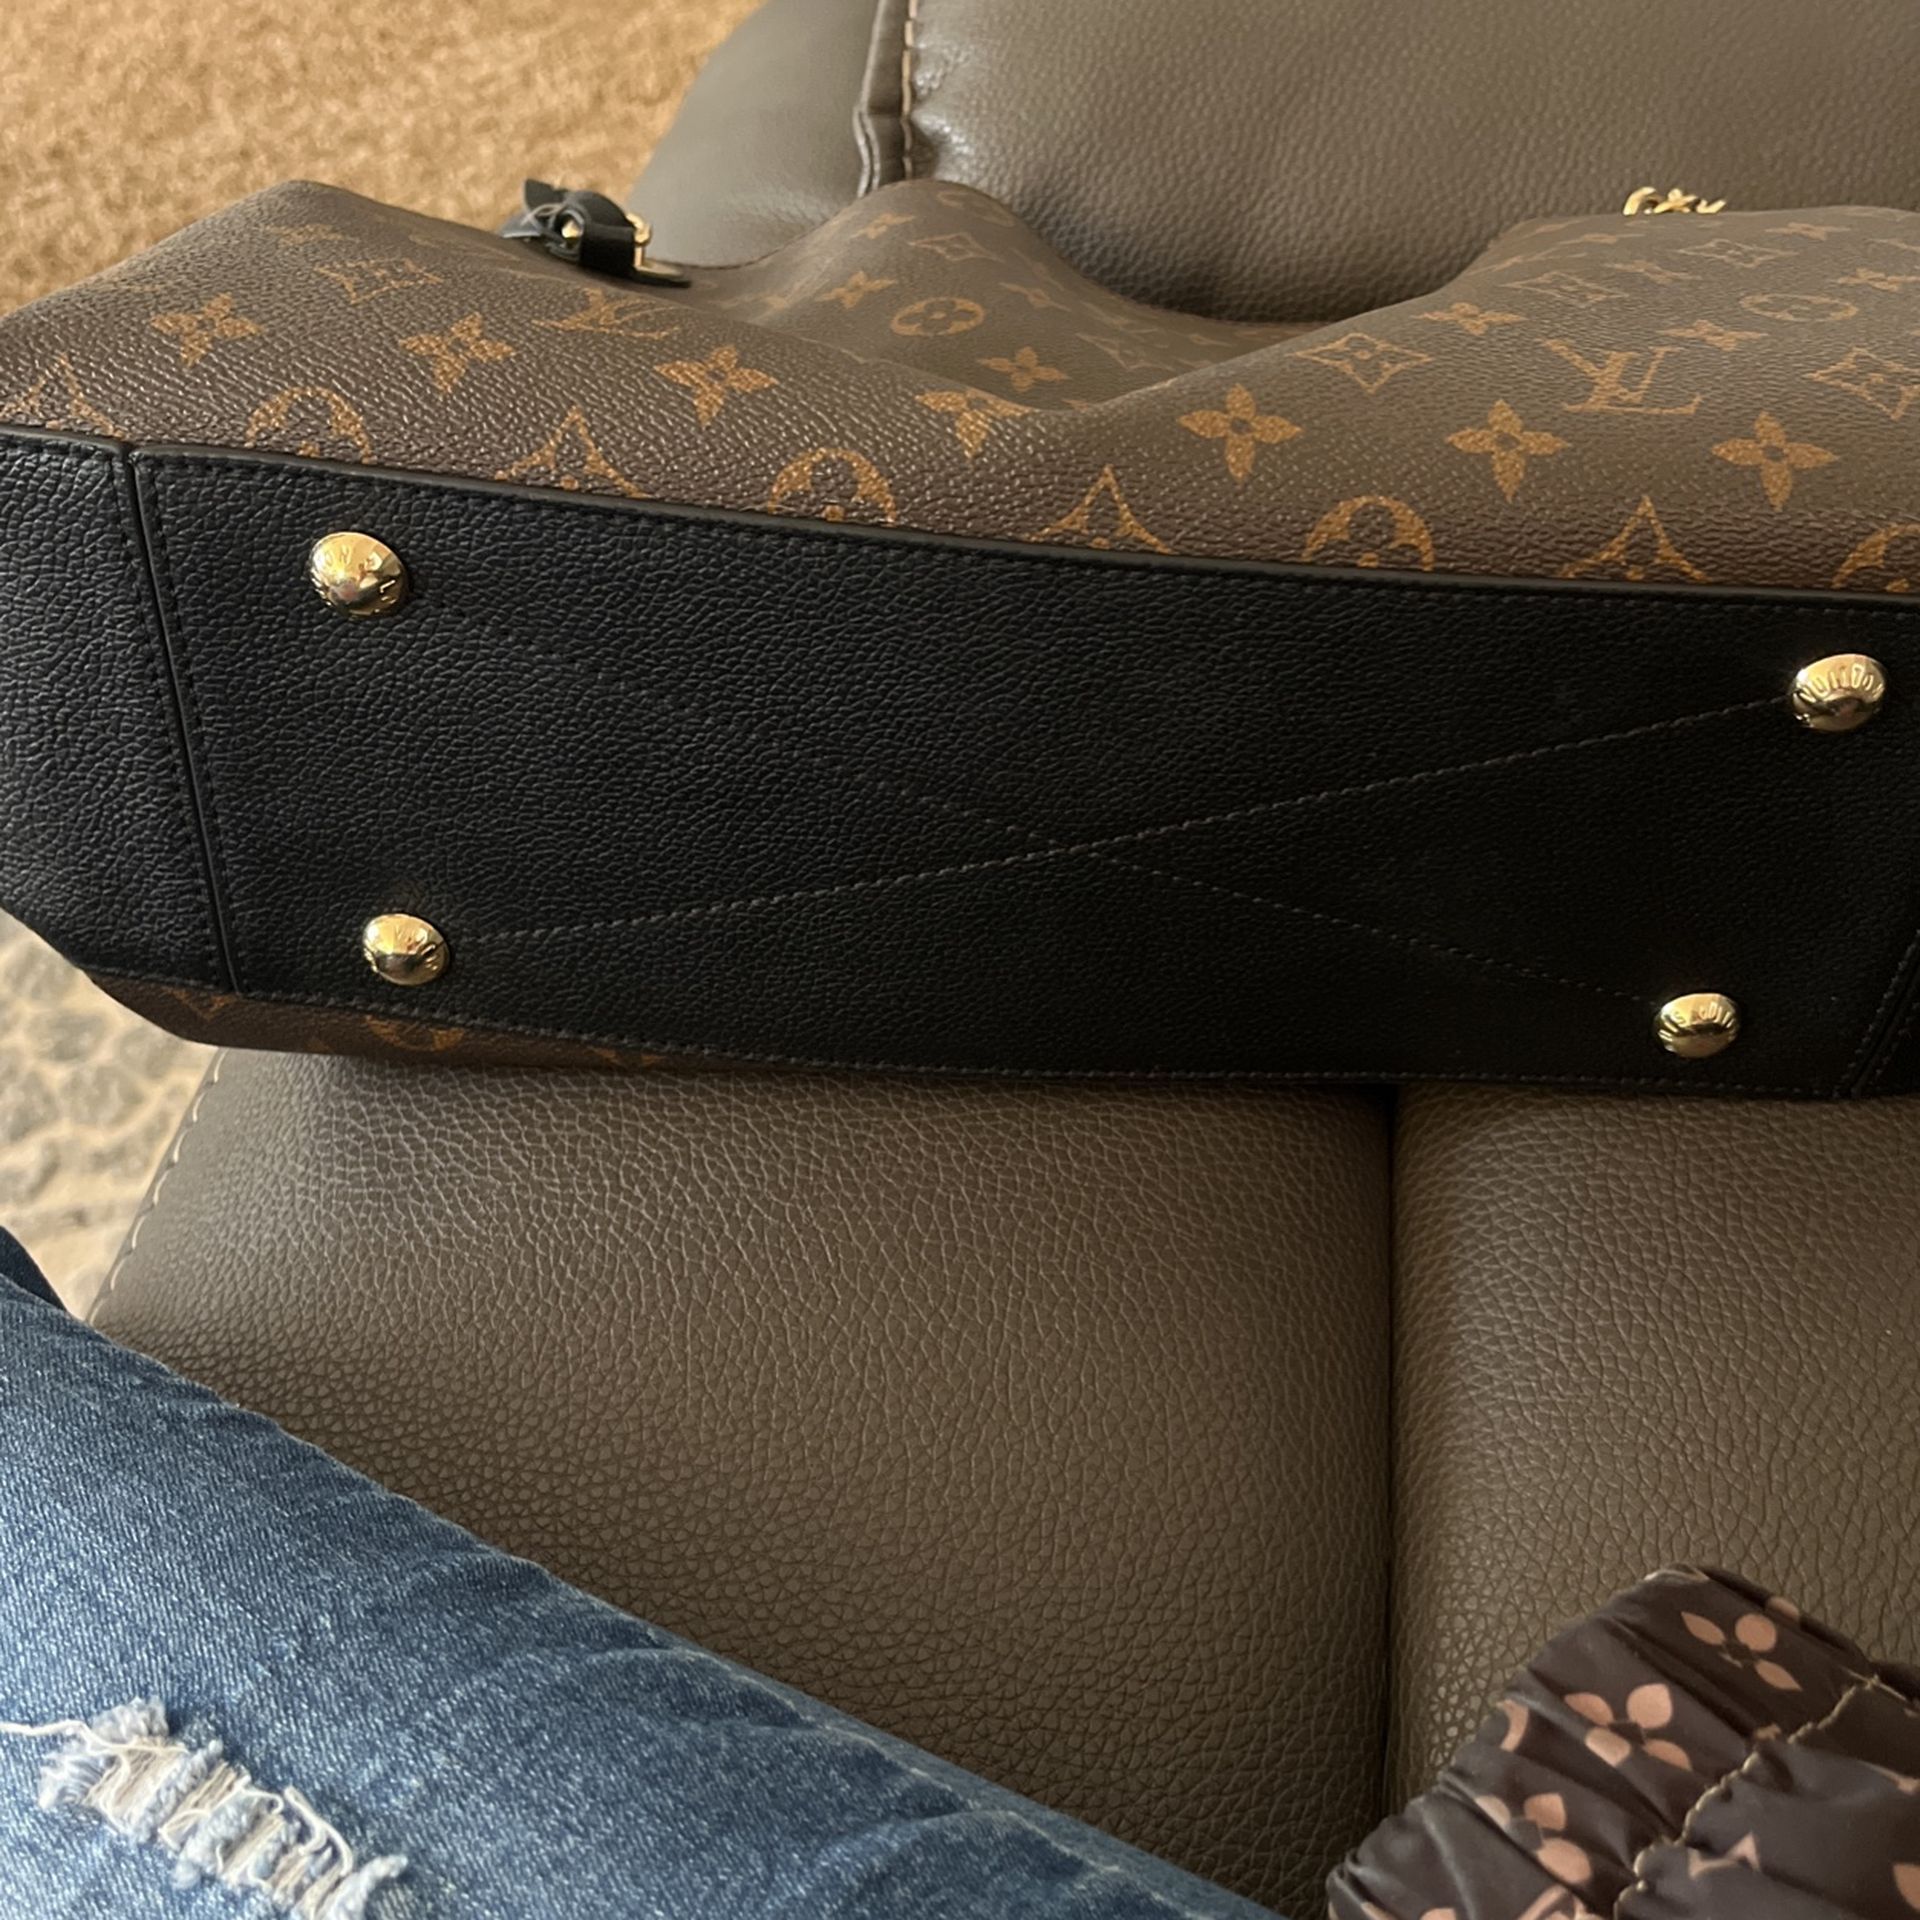 Saint Laurent And Louis Vuitton Bags Take Both For1/2 Original Price And  Bran New Never Used for Sale in Orangevale, CA - OfferUp